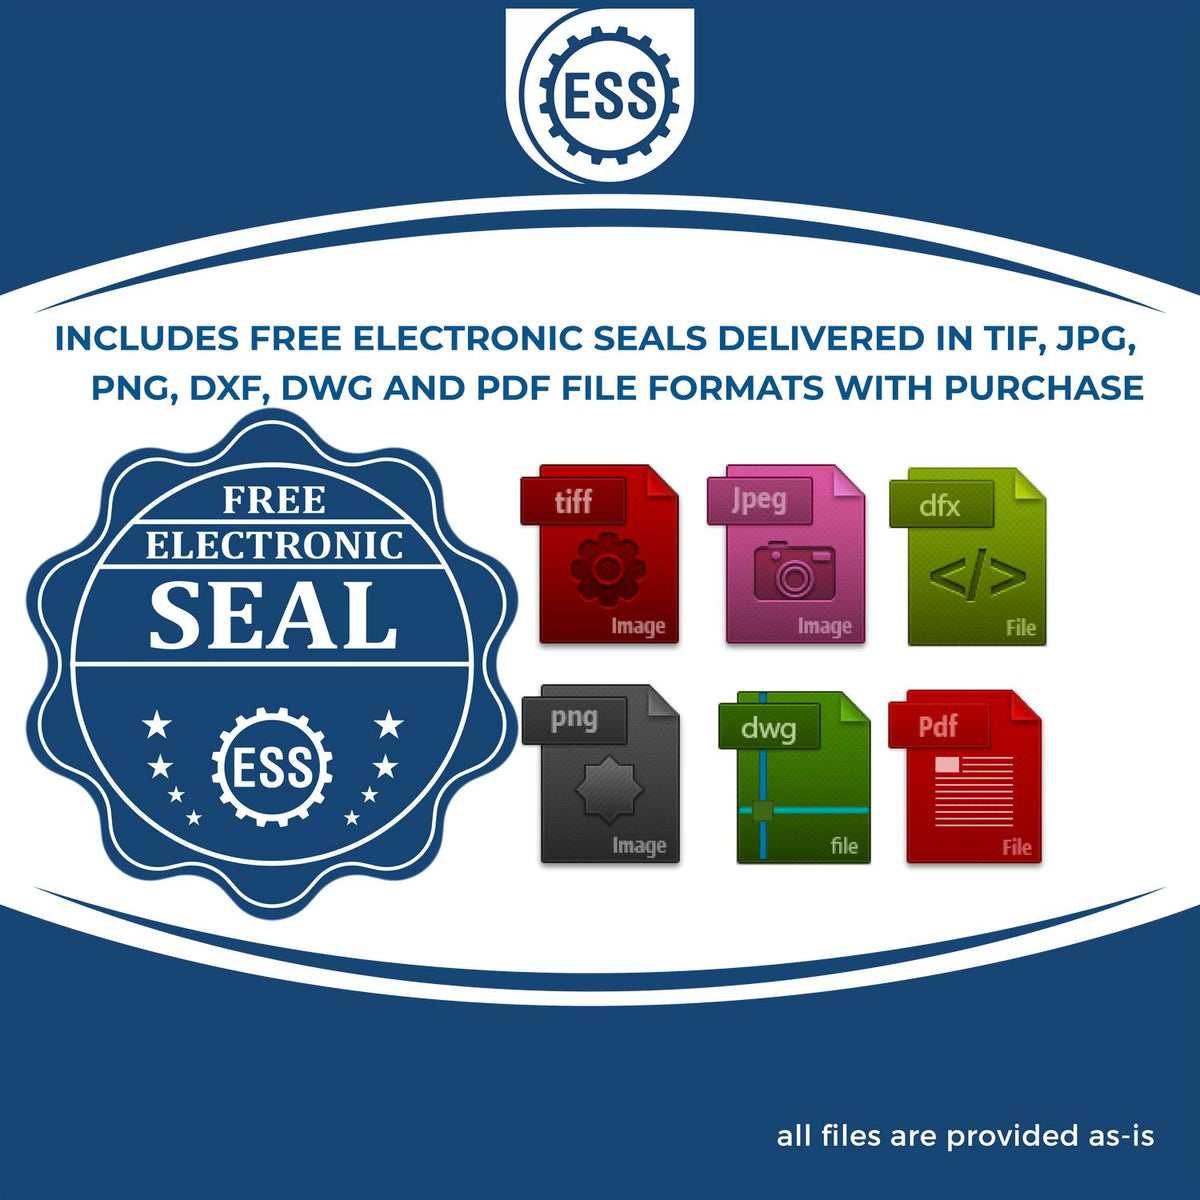 An infographic for the free electronic seal for the Hybrid New Jersey Engineer Seal illustrating the different file type icons such as DXF, DWG, TIF, JPG and PNG.